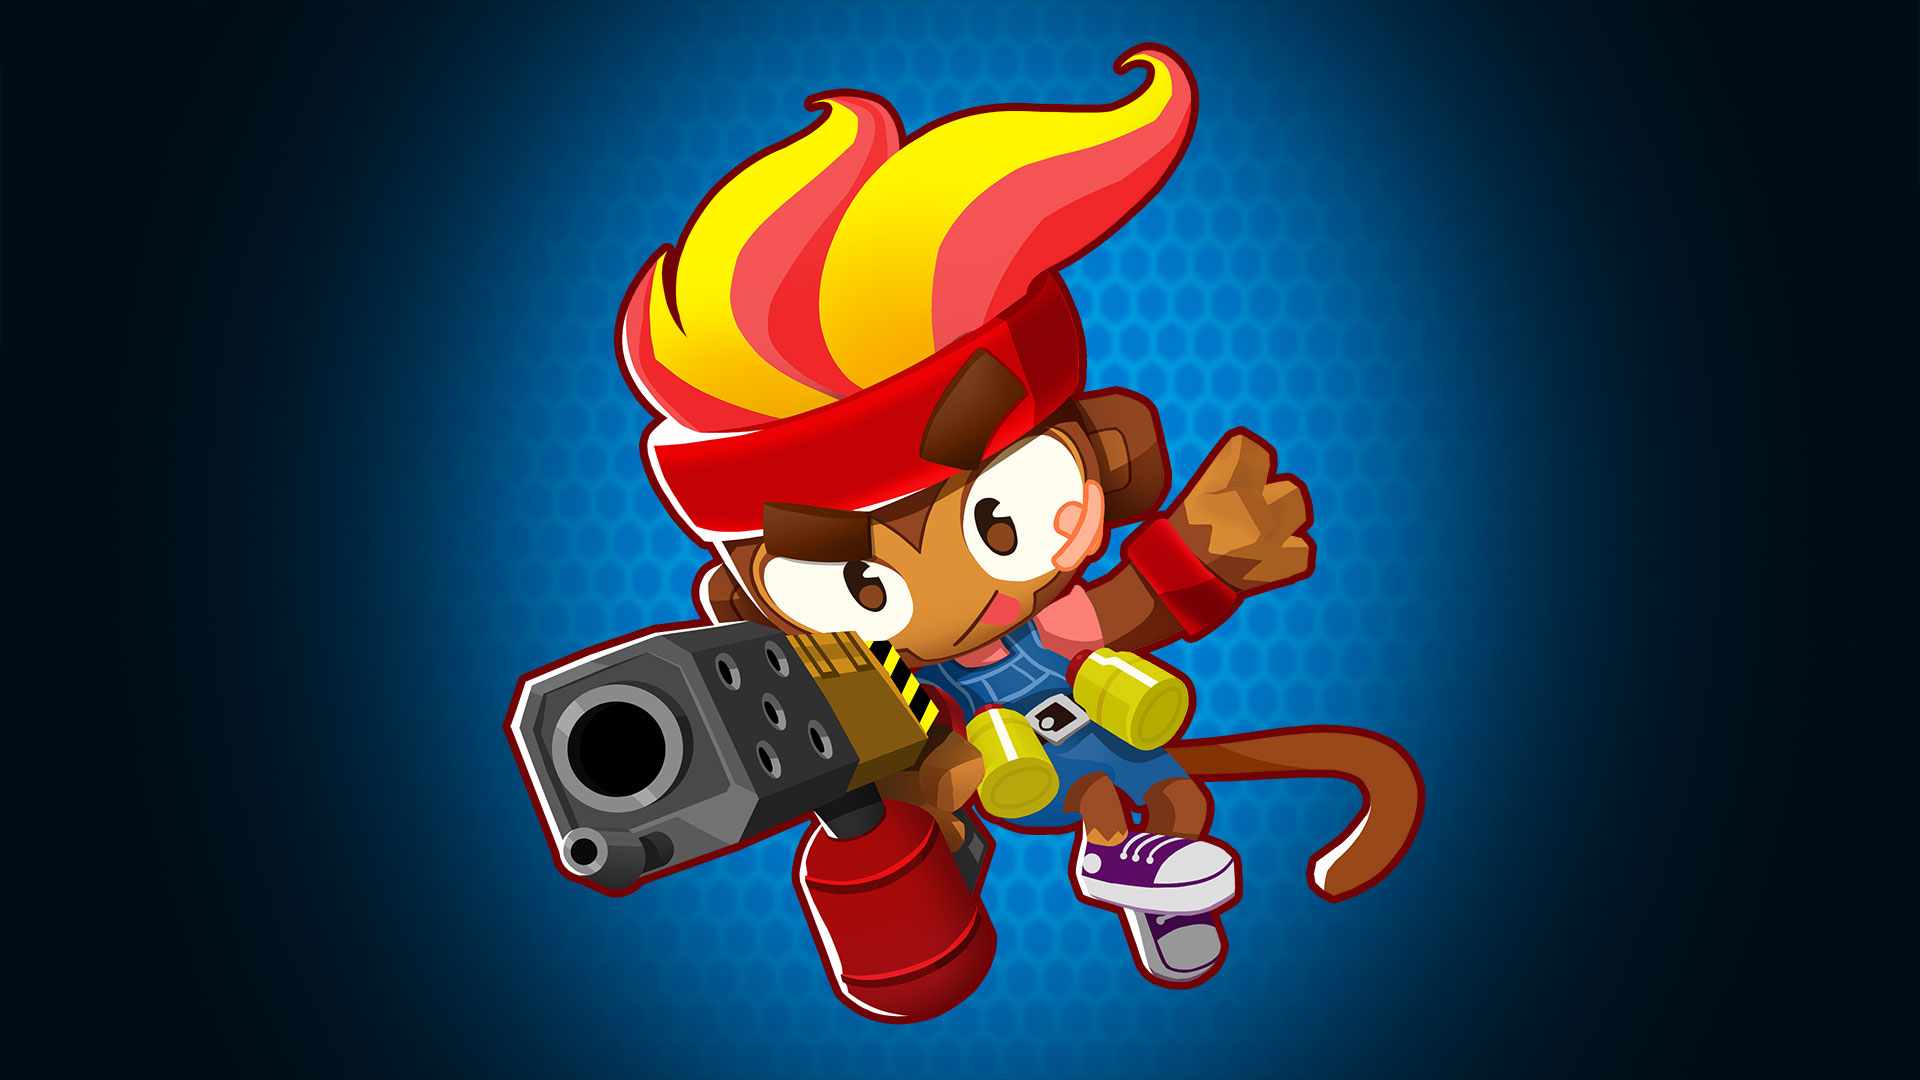 Download Bloons TD 6